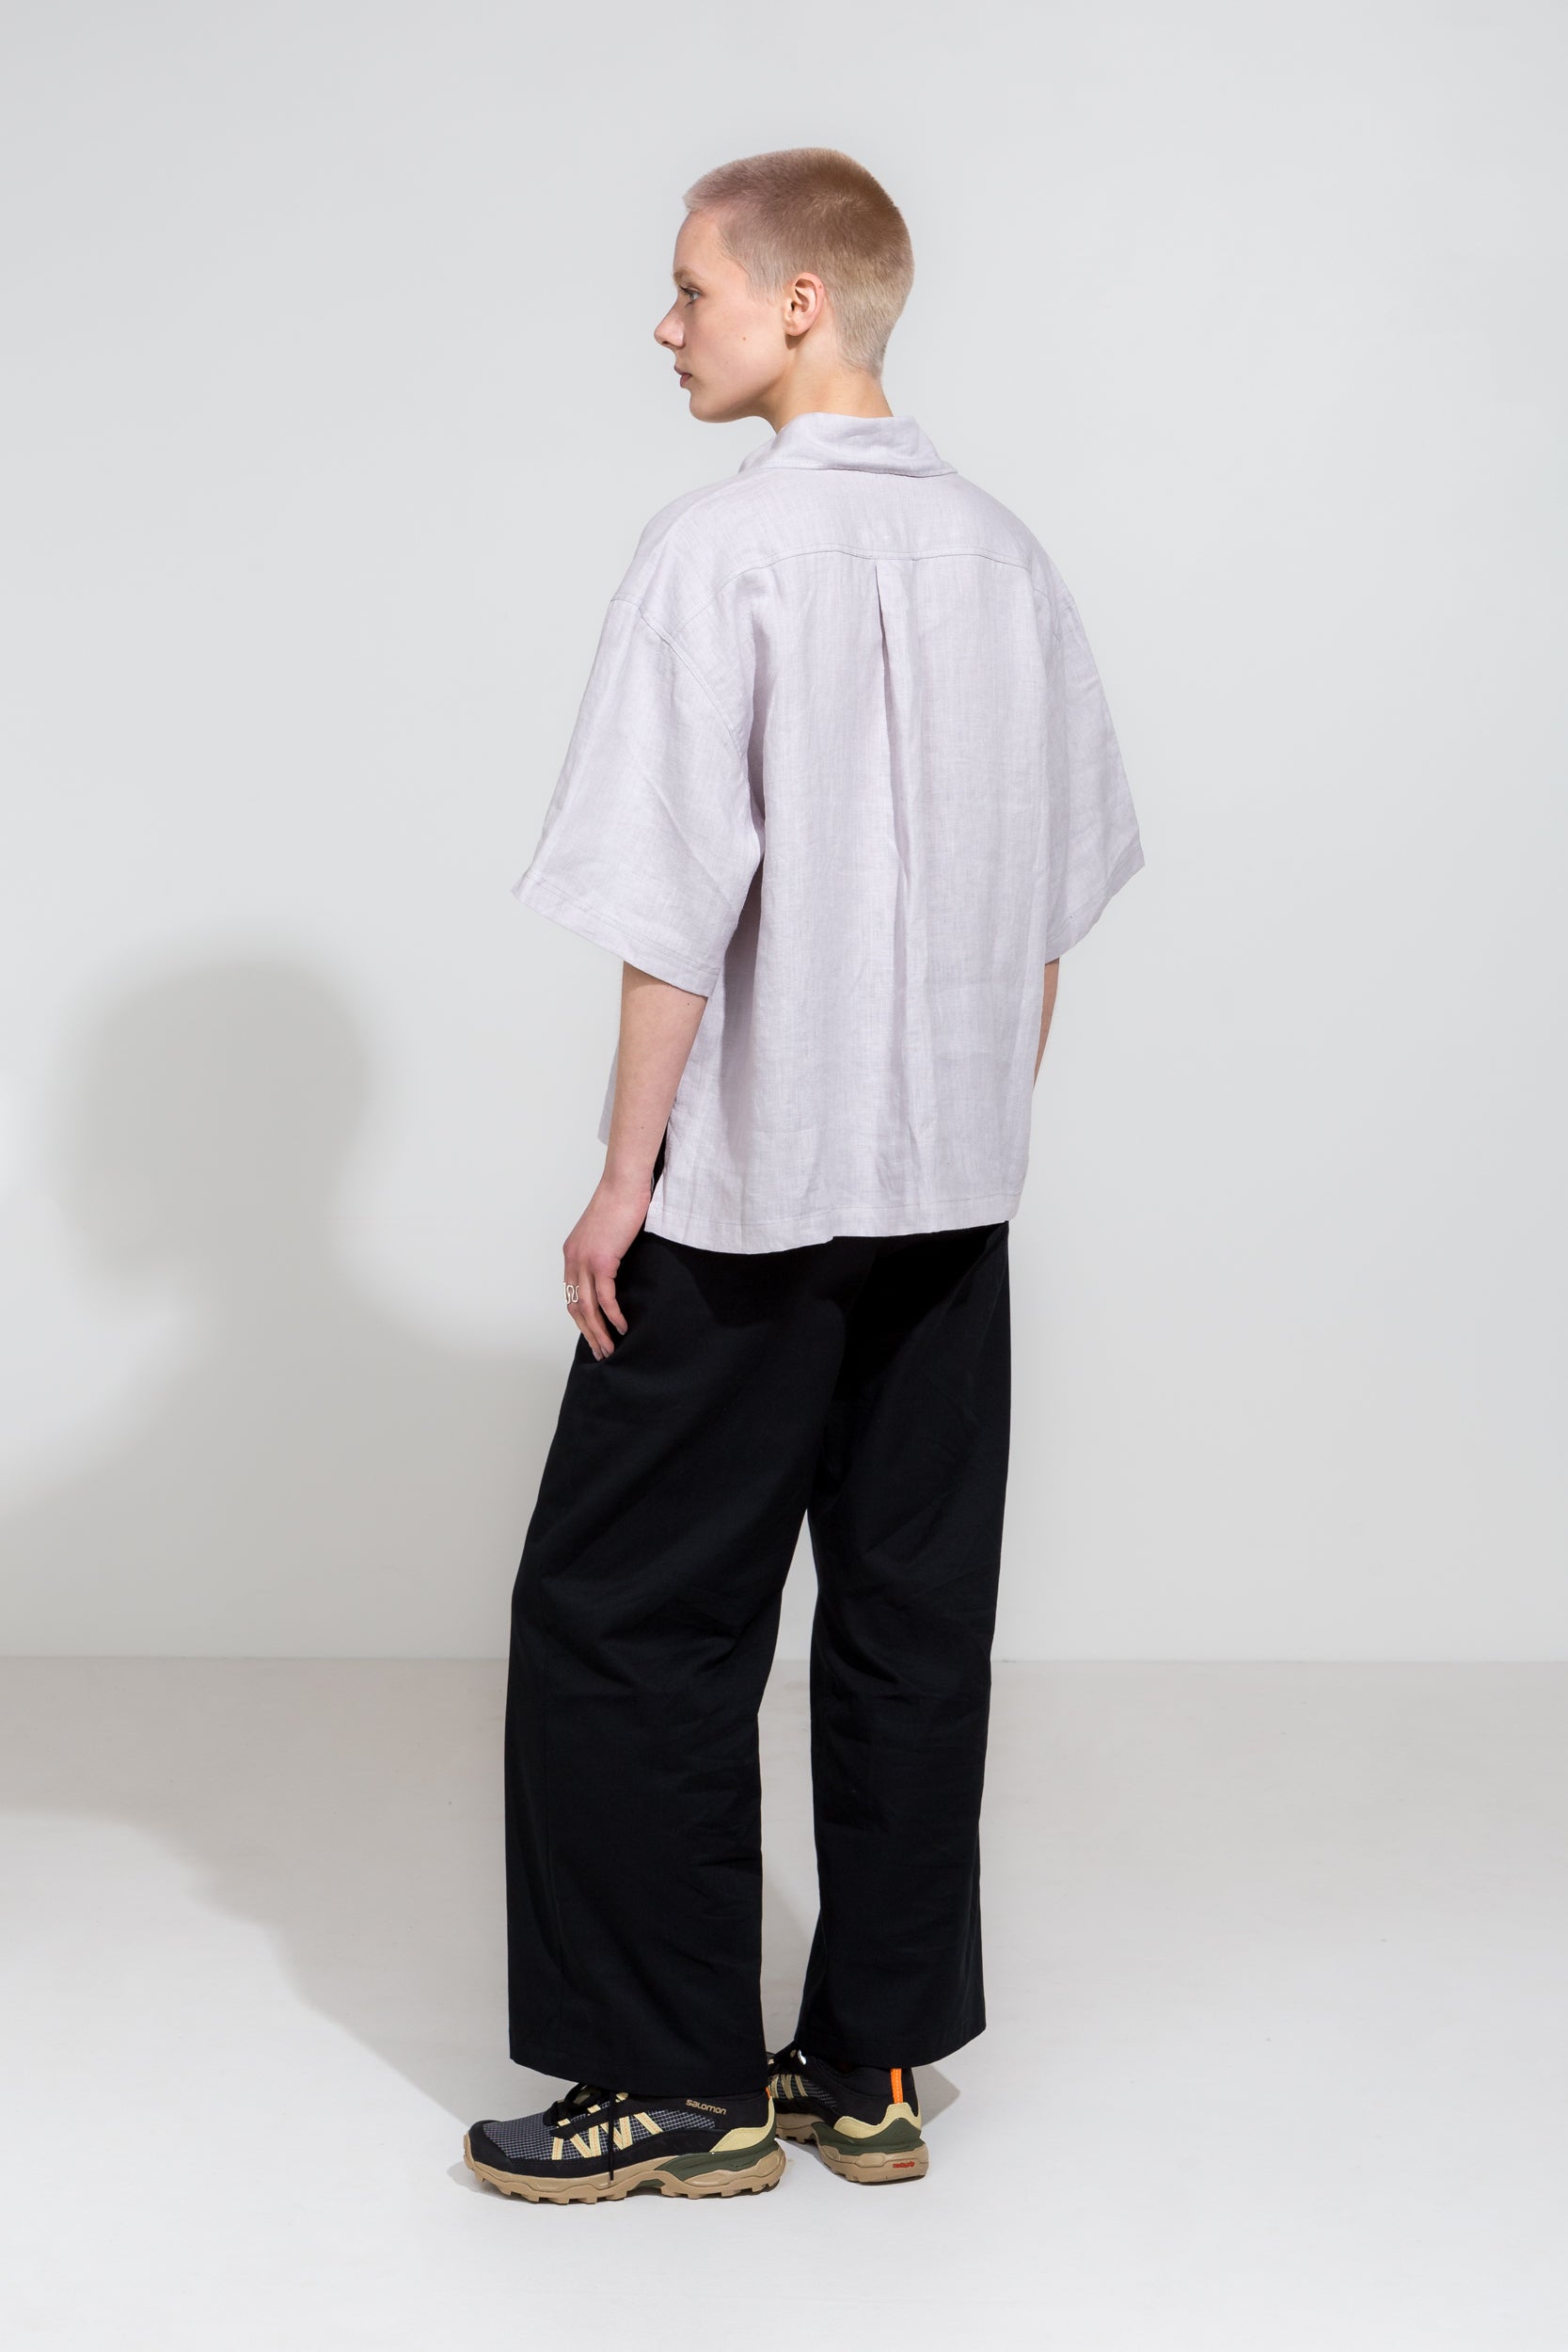 Relaxed short sleeve shirt in beige linen and black workwear pants in organic cotton